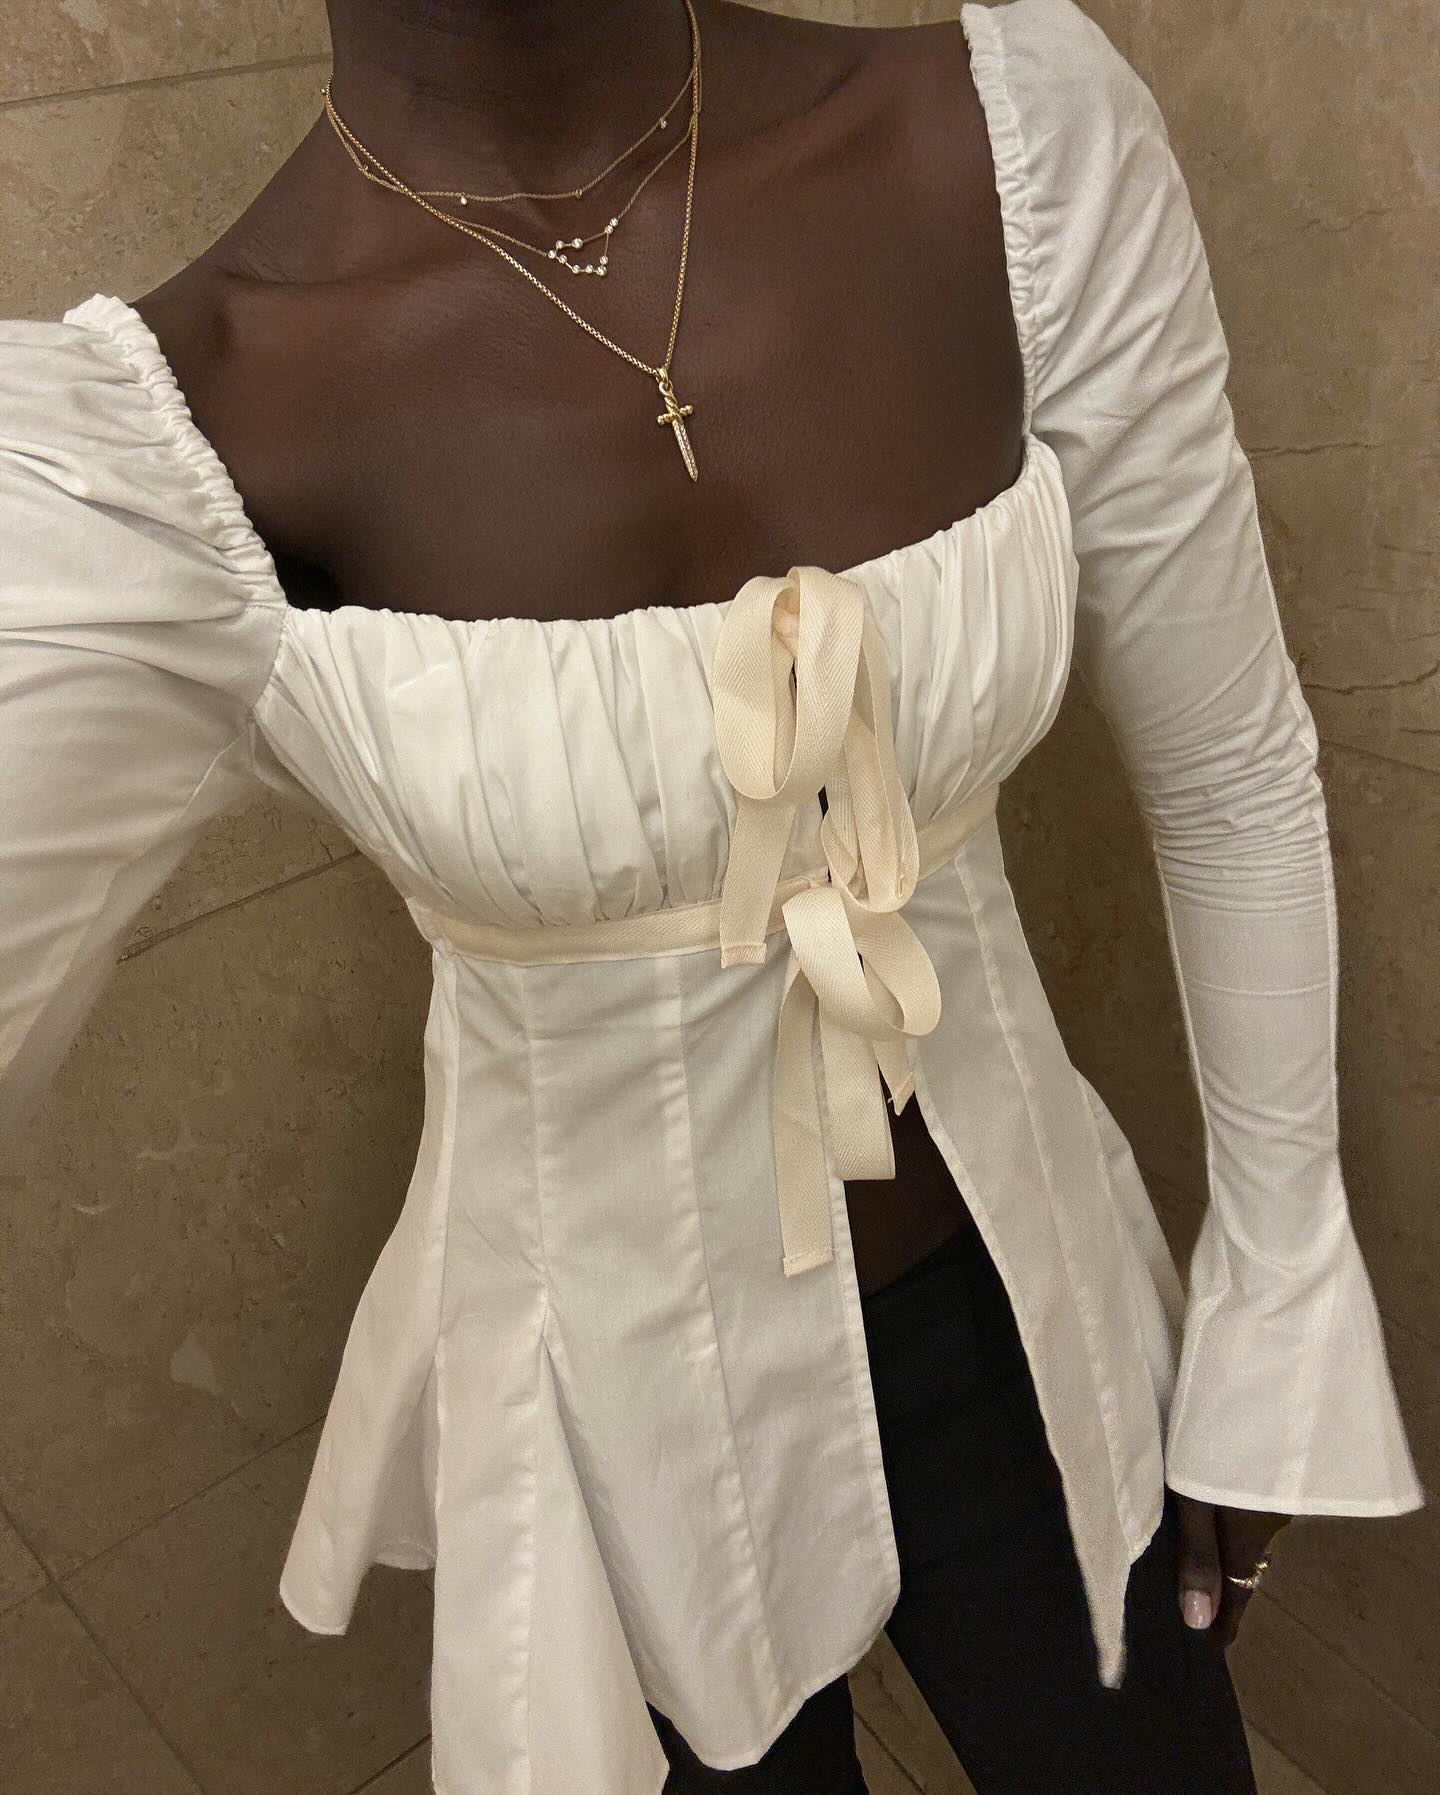 Influencer wears a top with elongated cuffs.